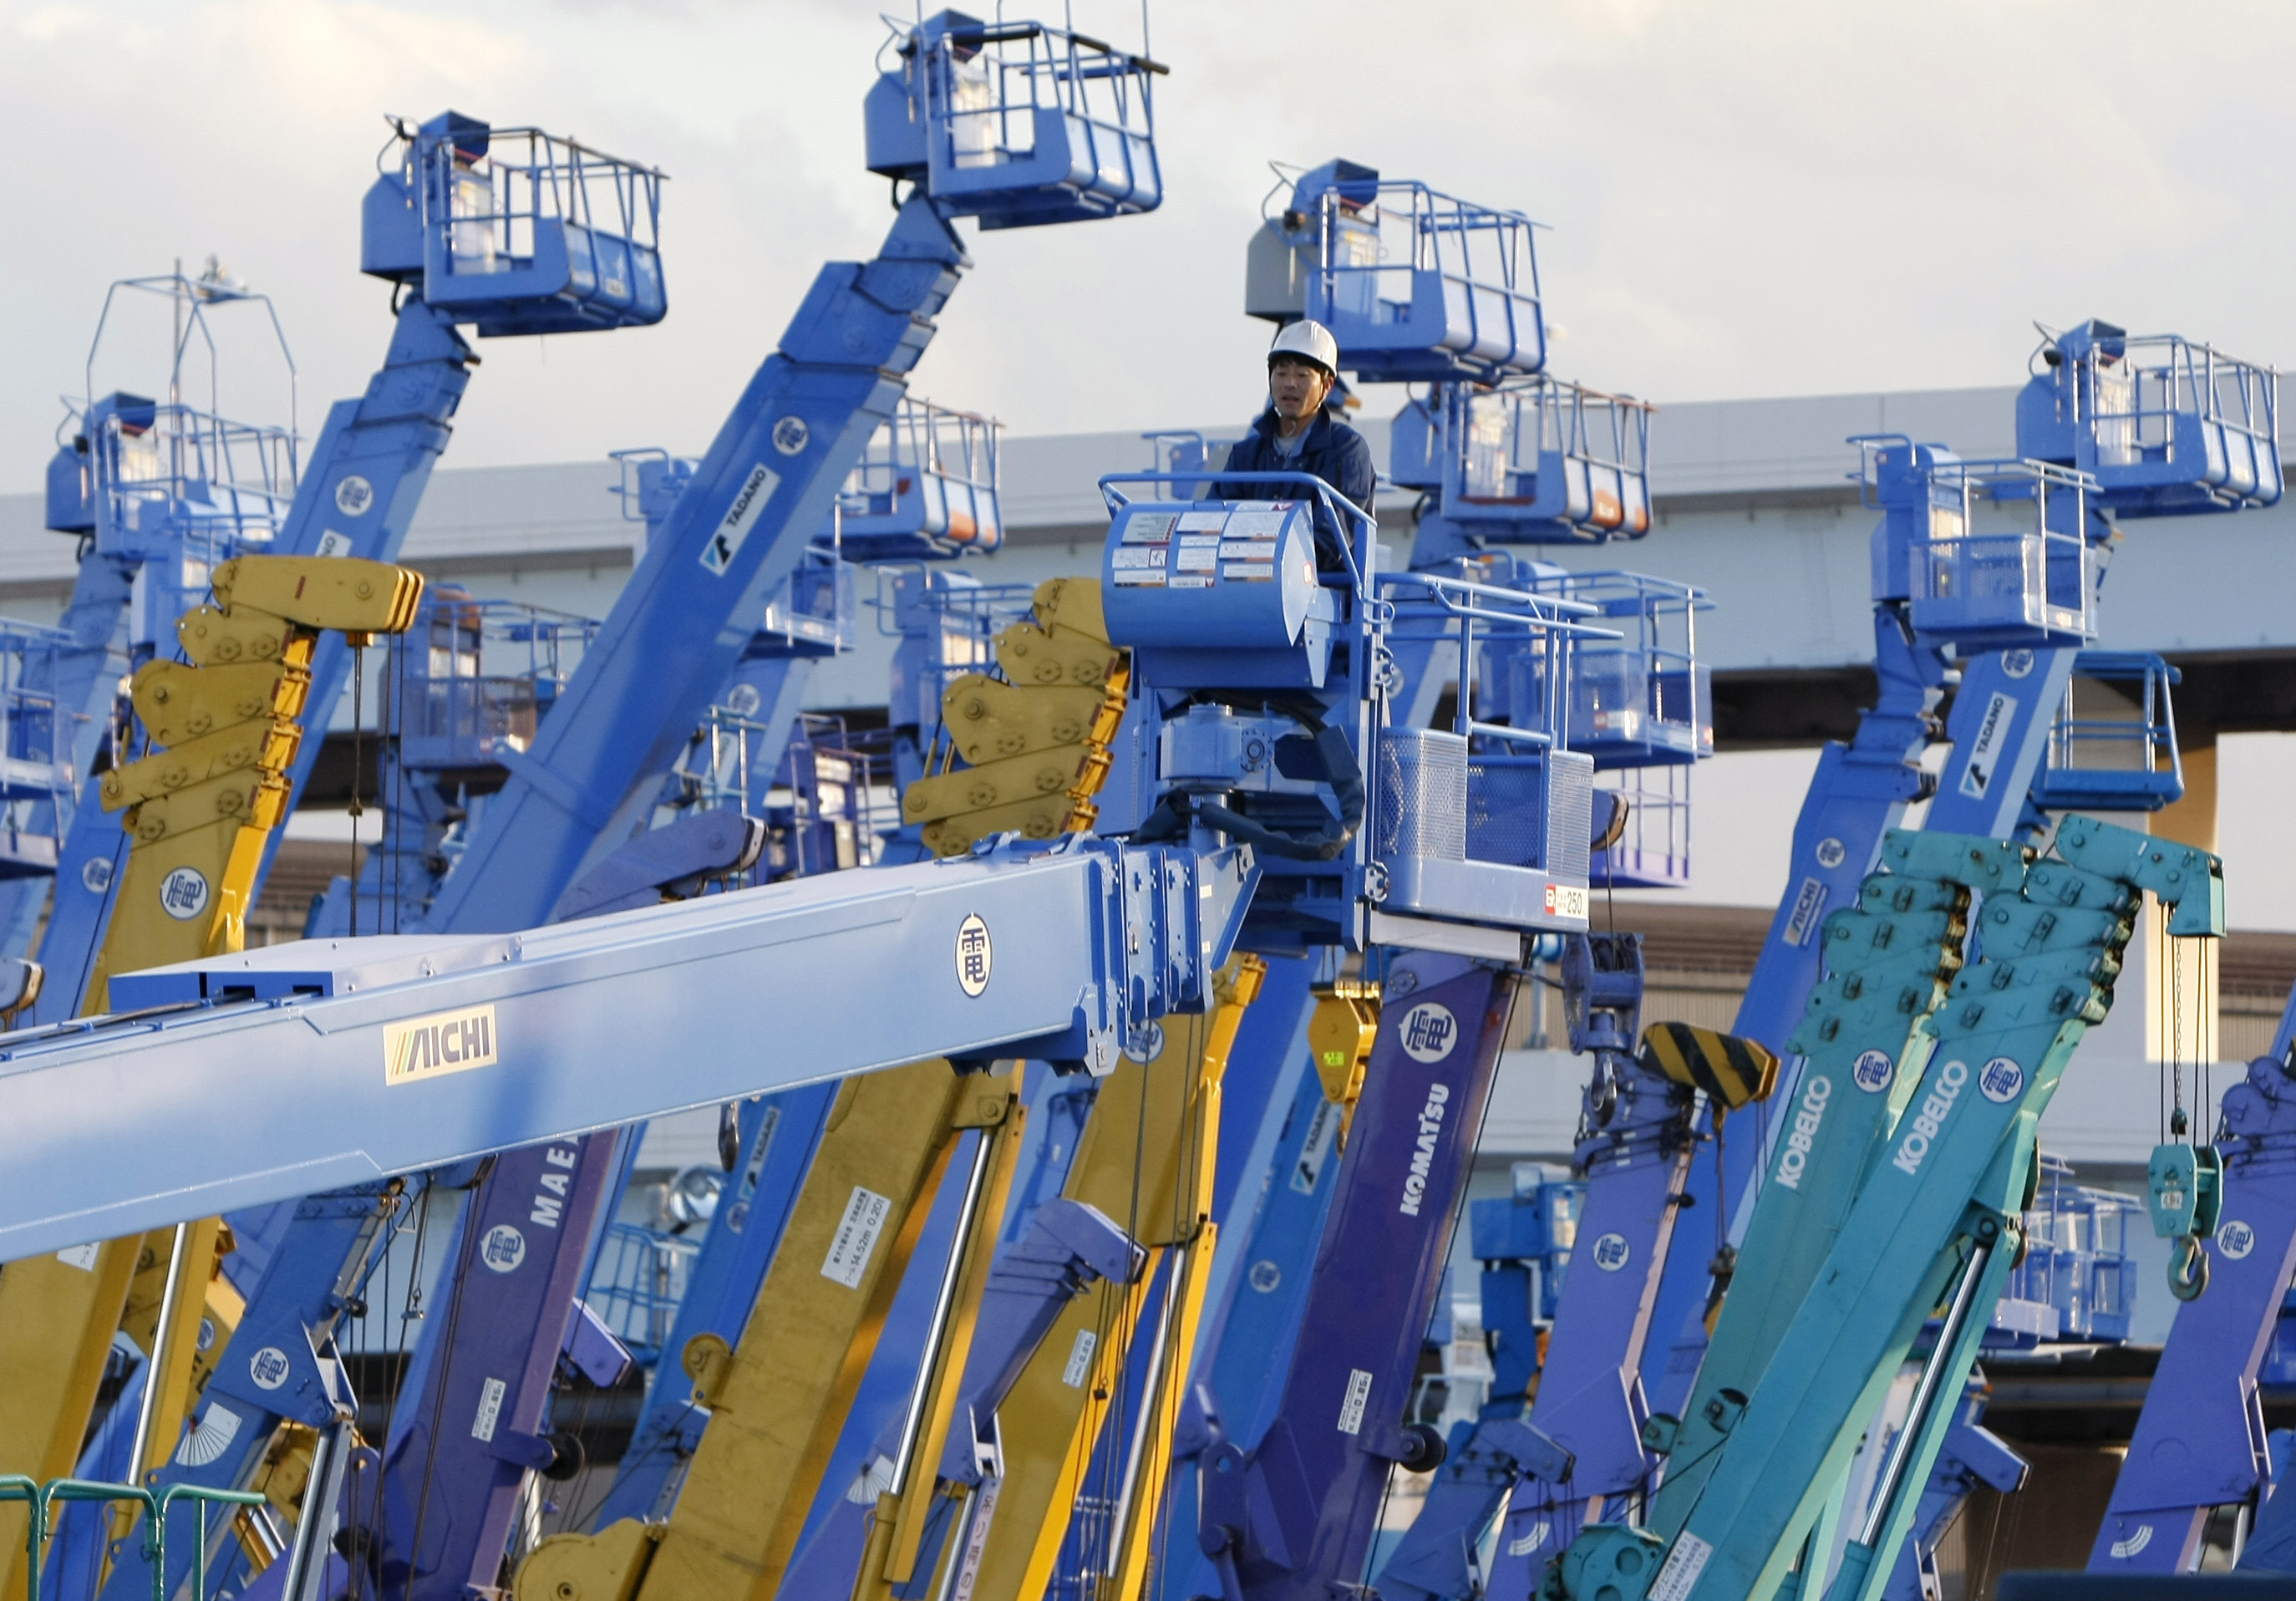 A worker stands on a crane which is parked at a construction site at Keihin industrial zone in Kawasaki